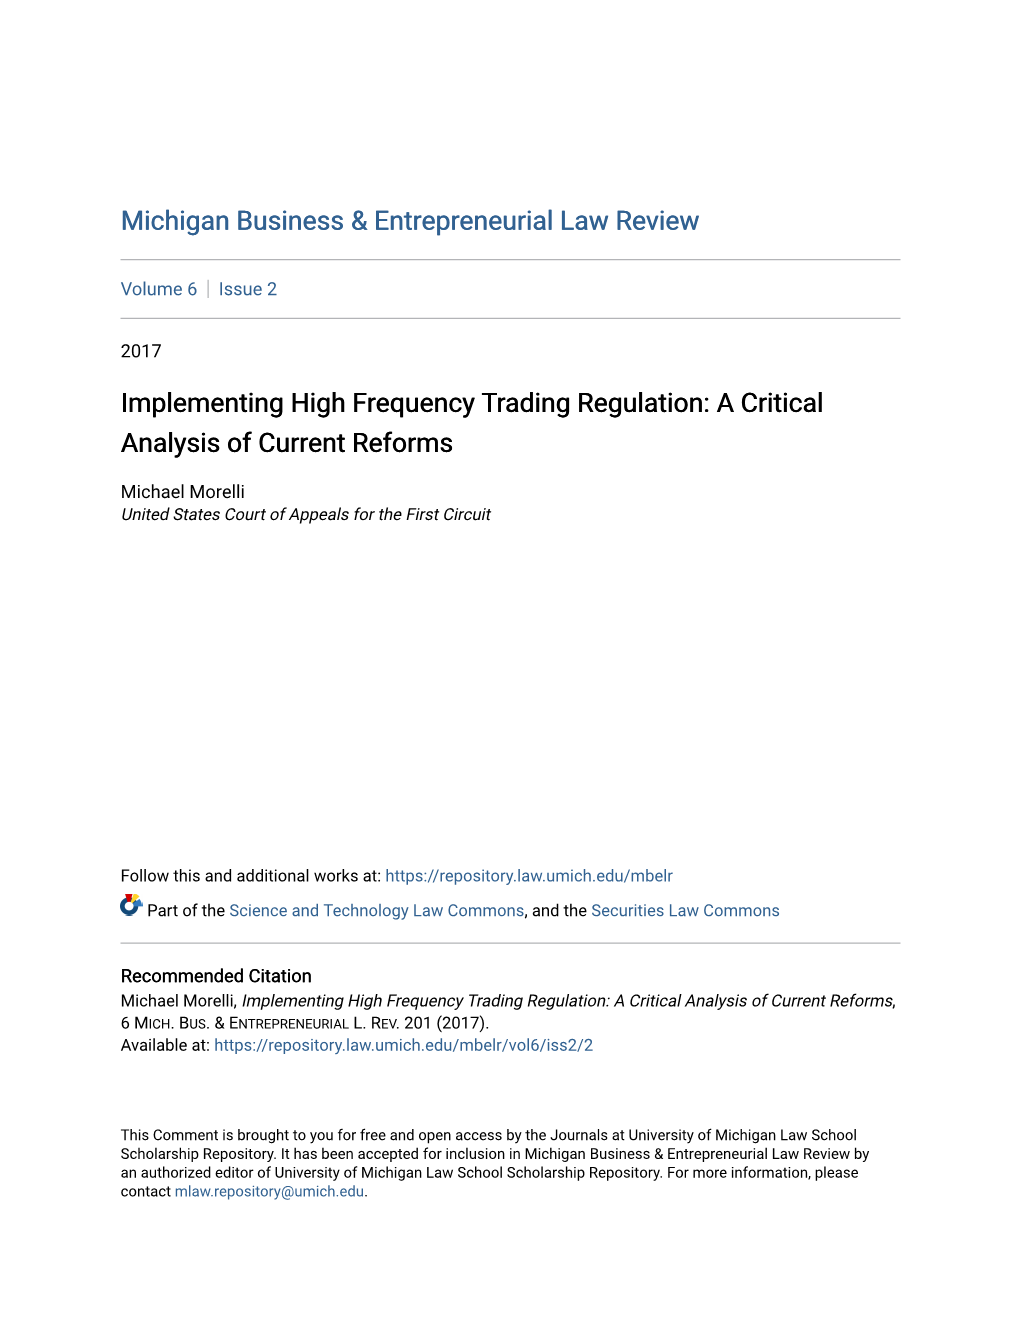 Implementing High Frequency Trading Regulation: a Critical Analysis of Current Reforms